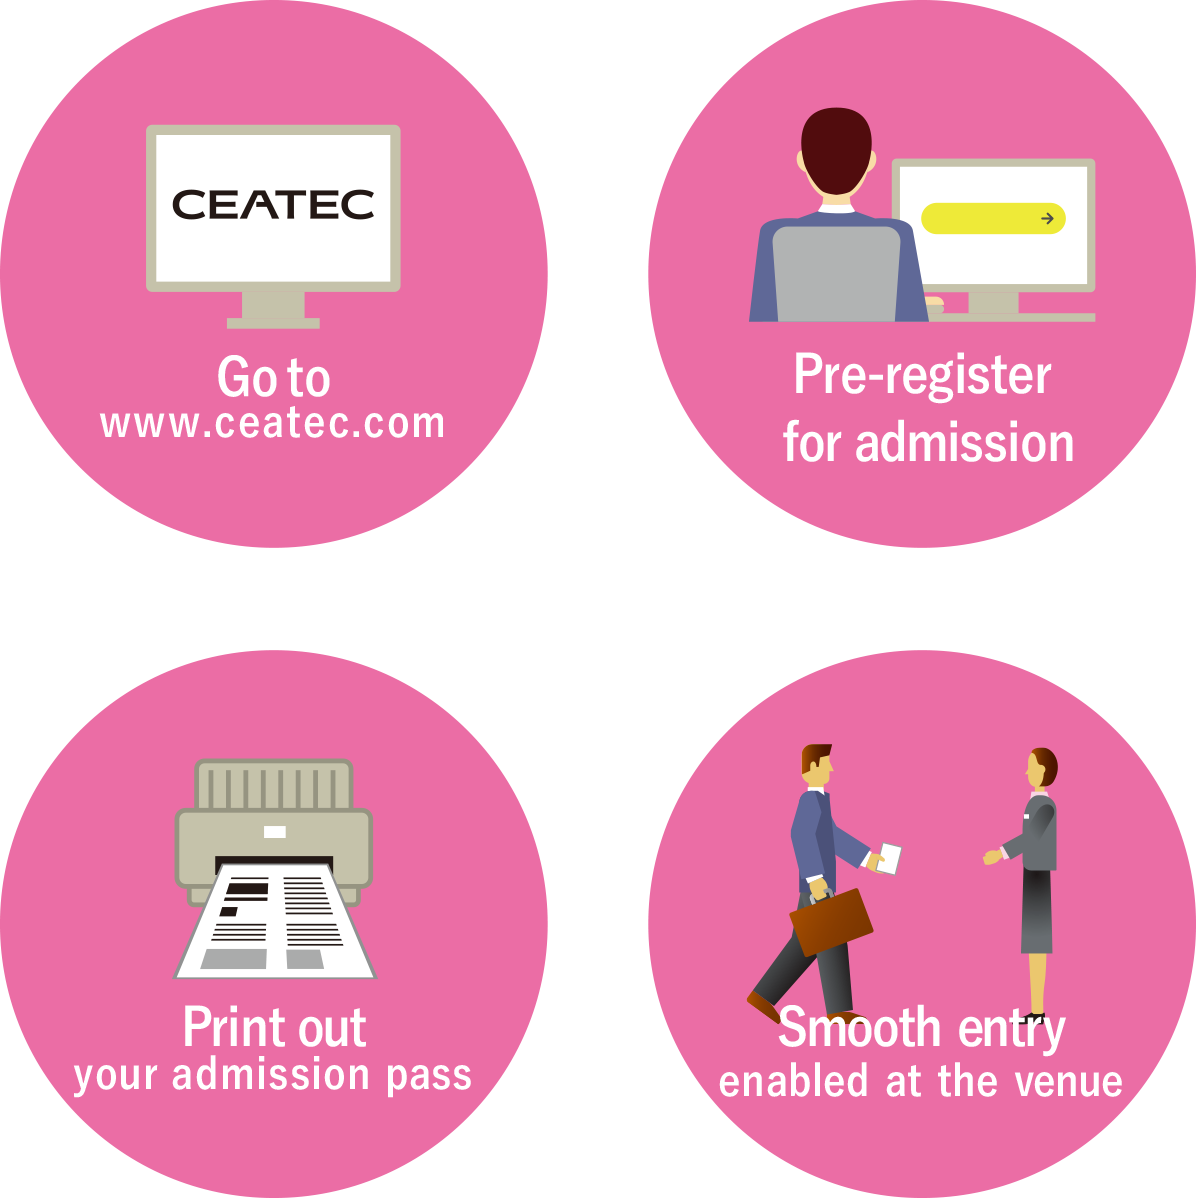 Go to www.ceatec.com → Pre-register for admission → Print out your admission pass → Smooth entry enabled at the venue